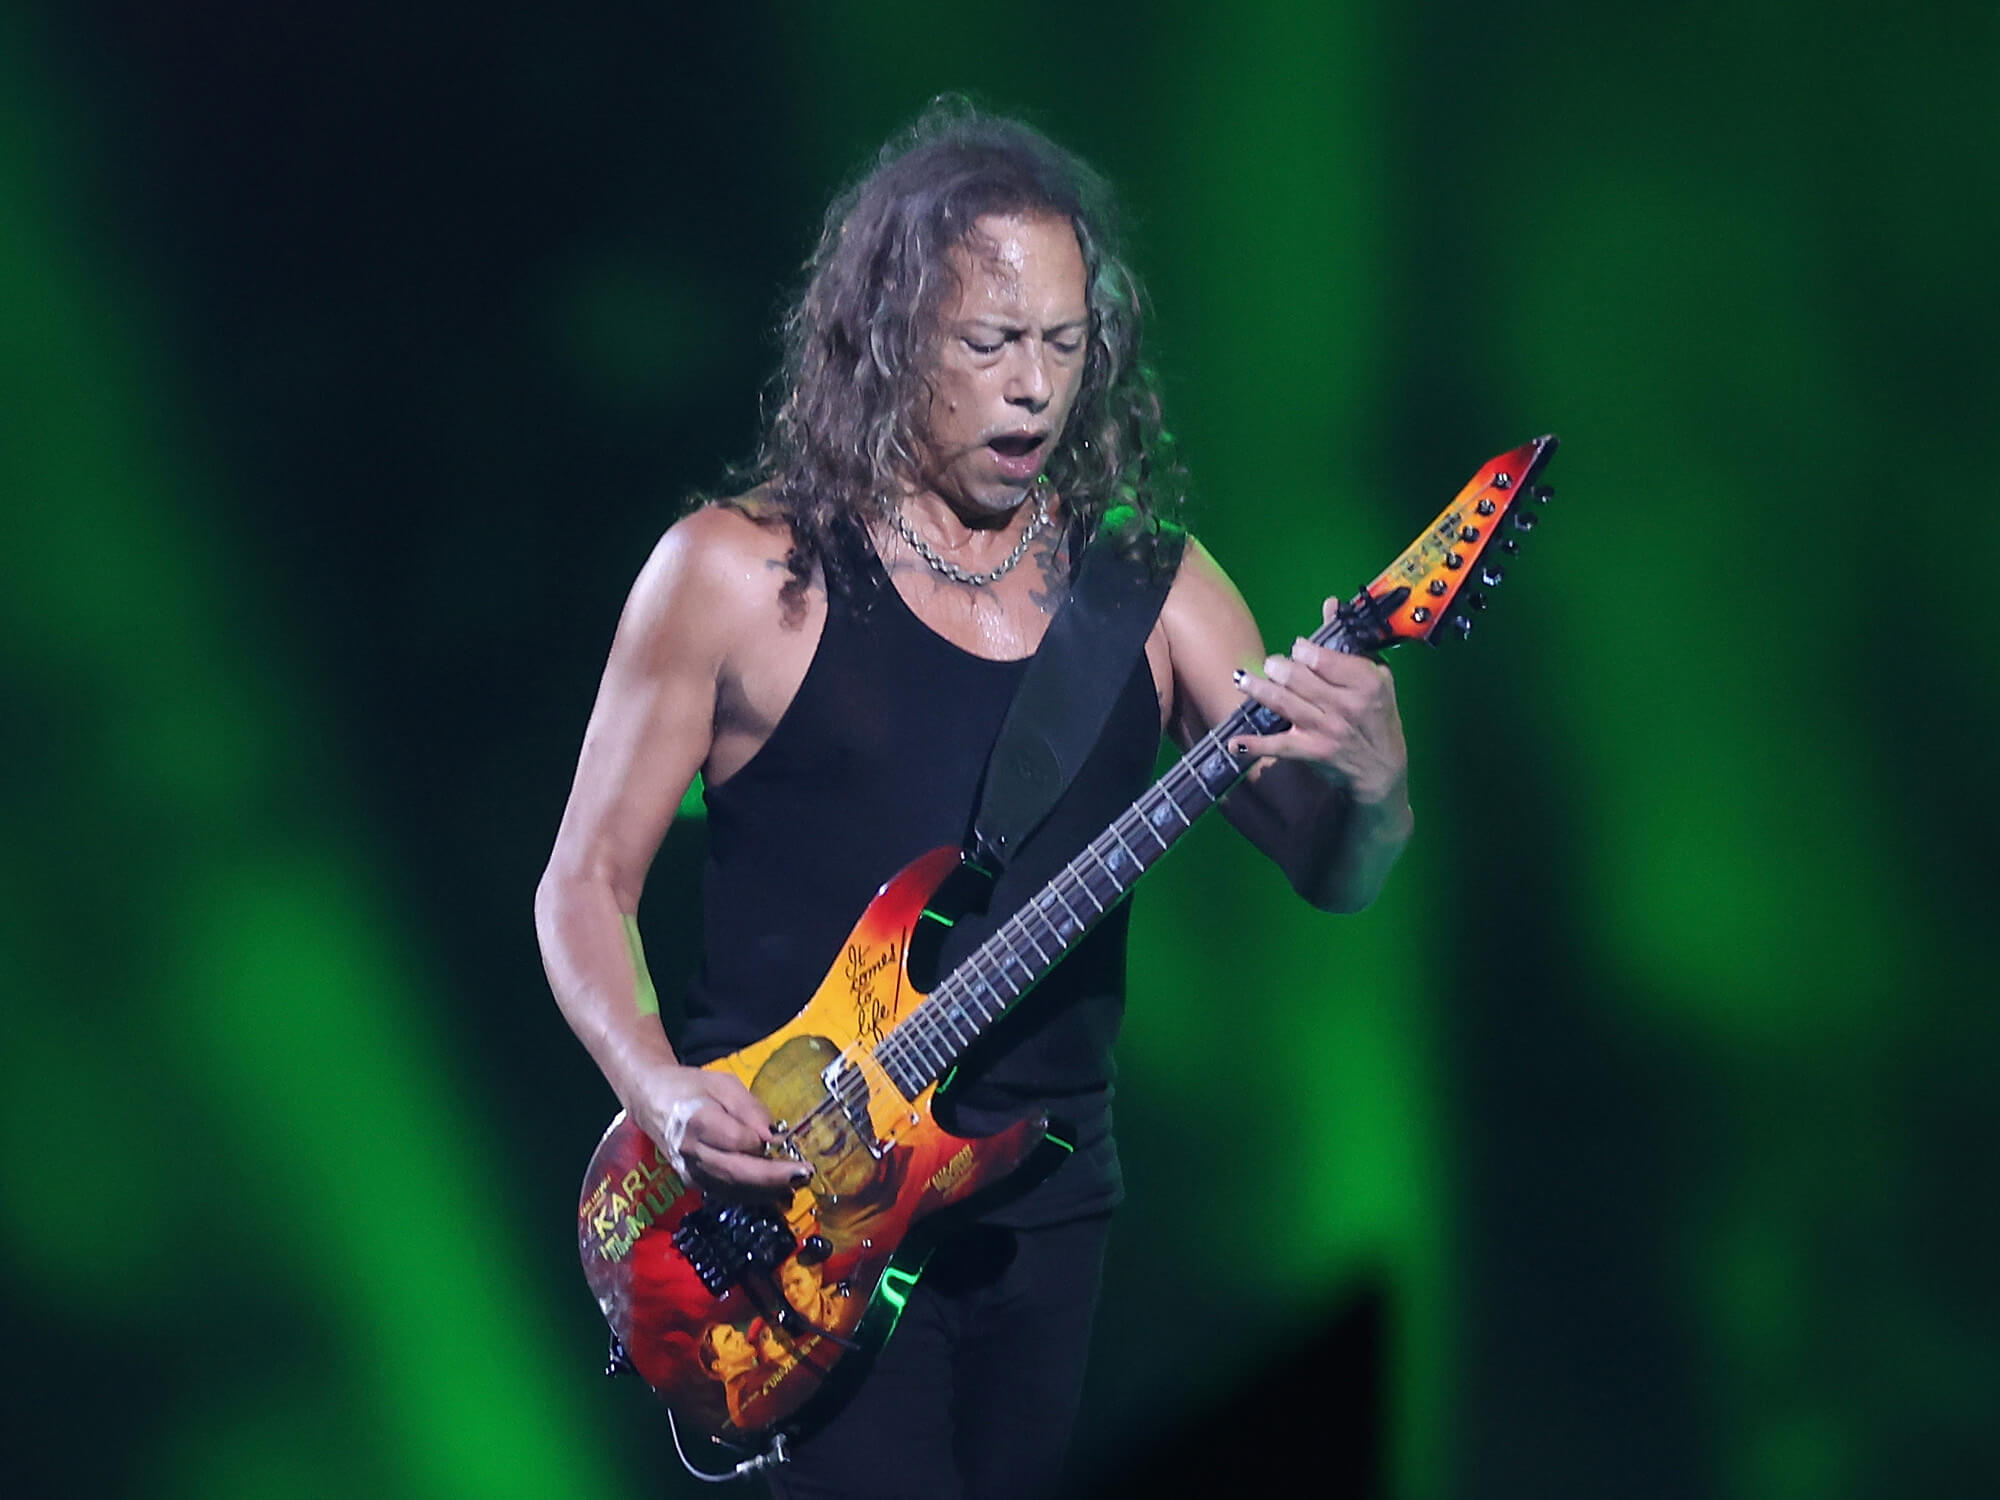 Kirk Hammett playing guitar on stage. He stands before green lighting and is looking down at his instrument.